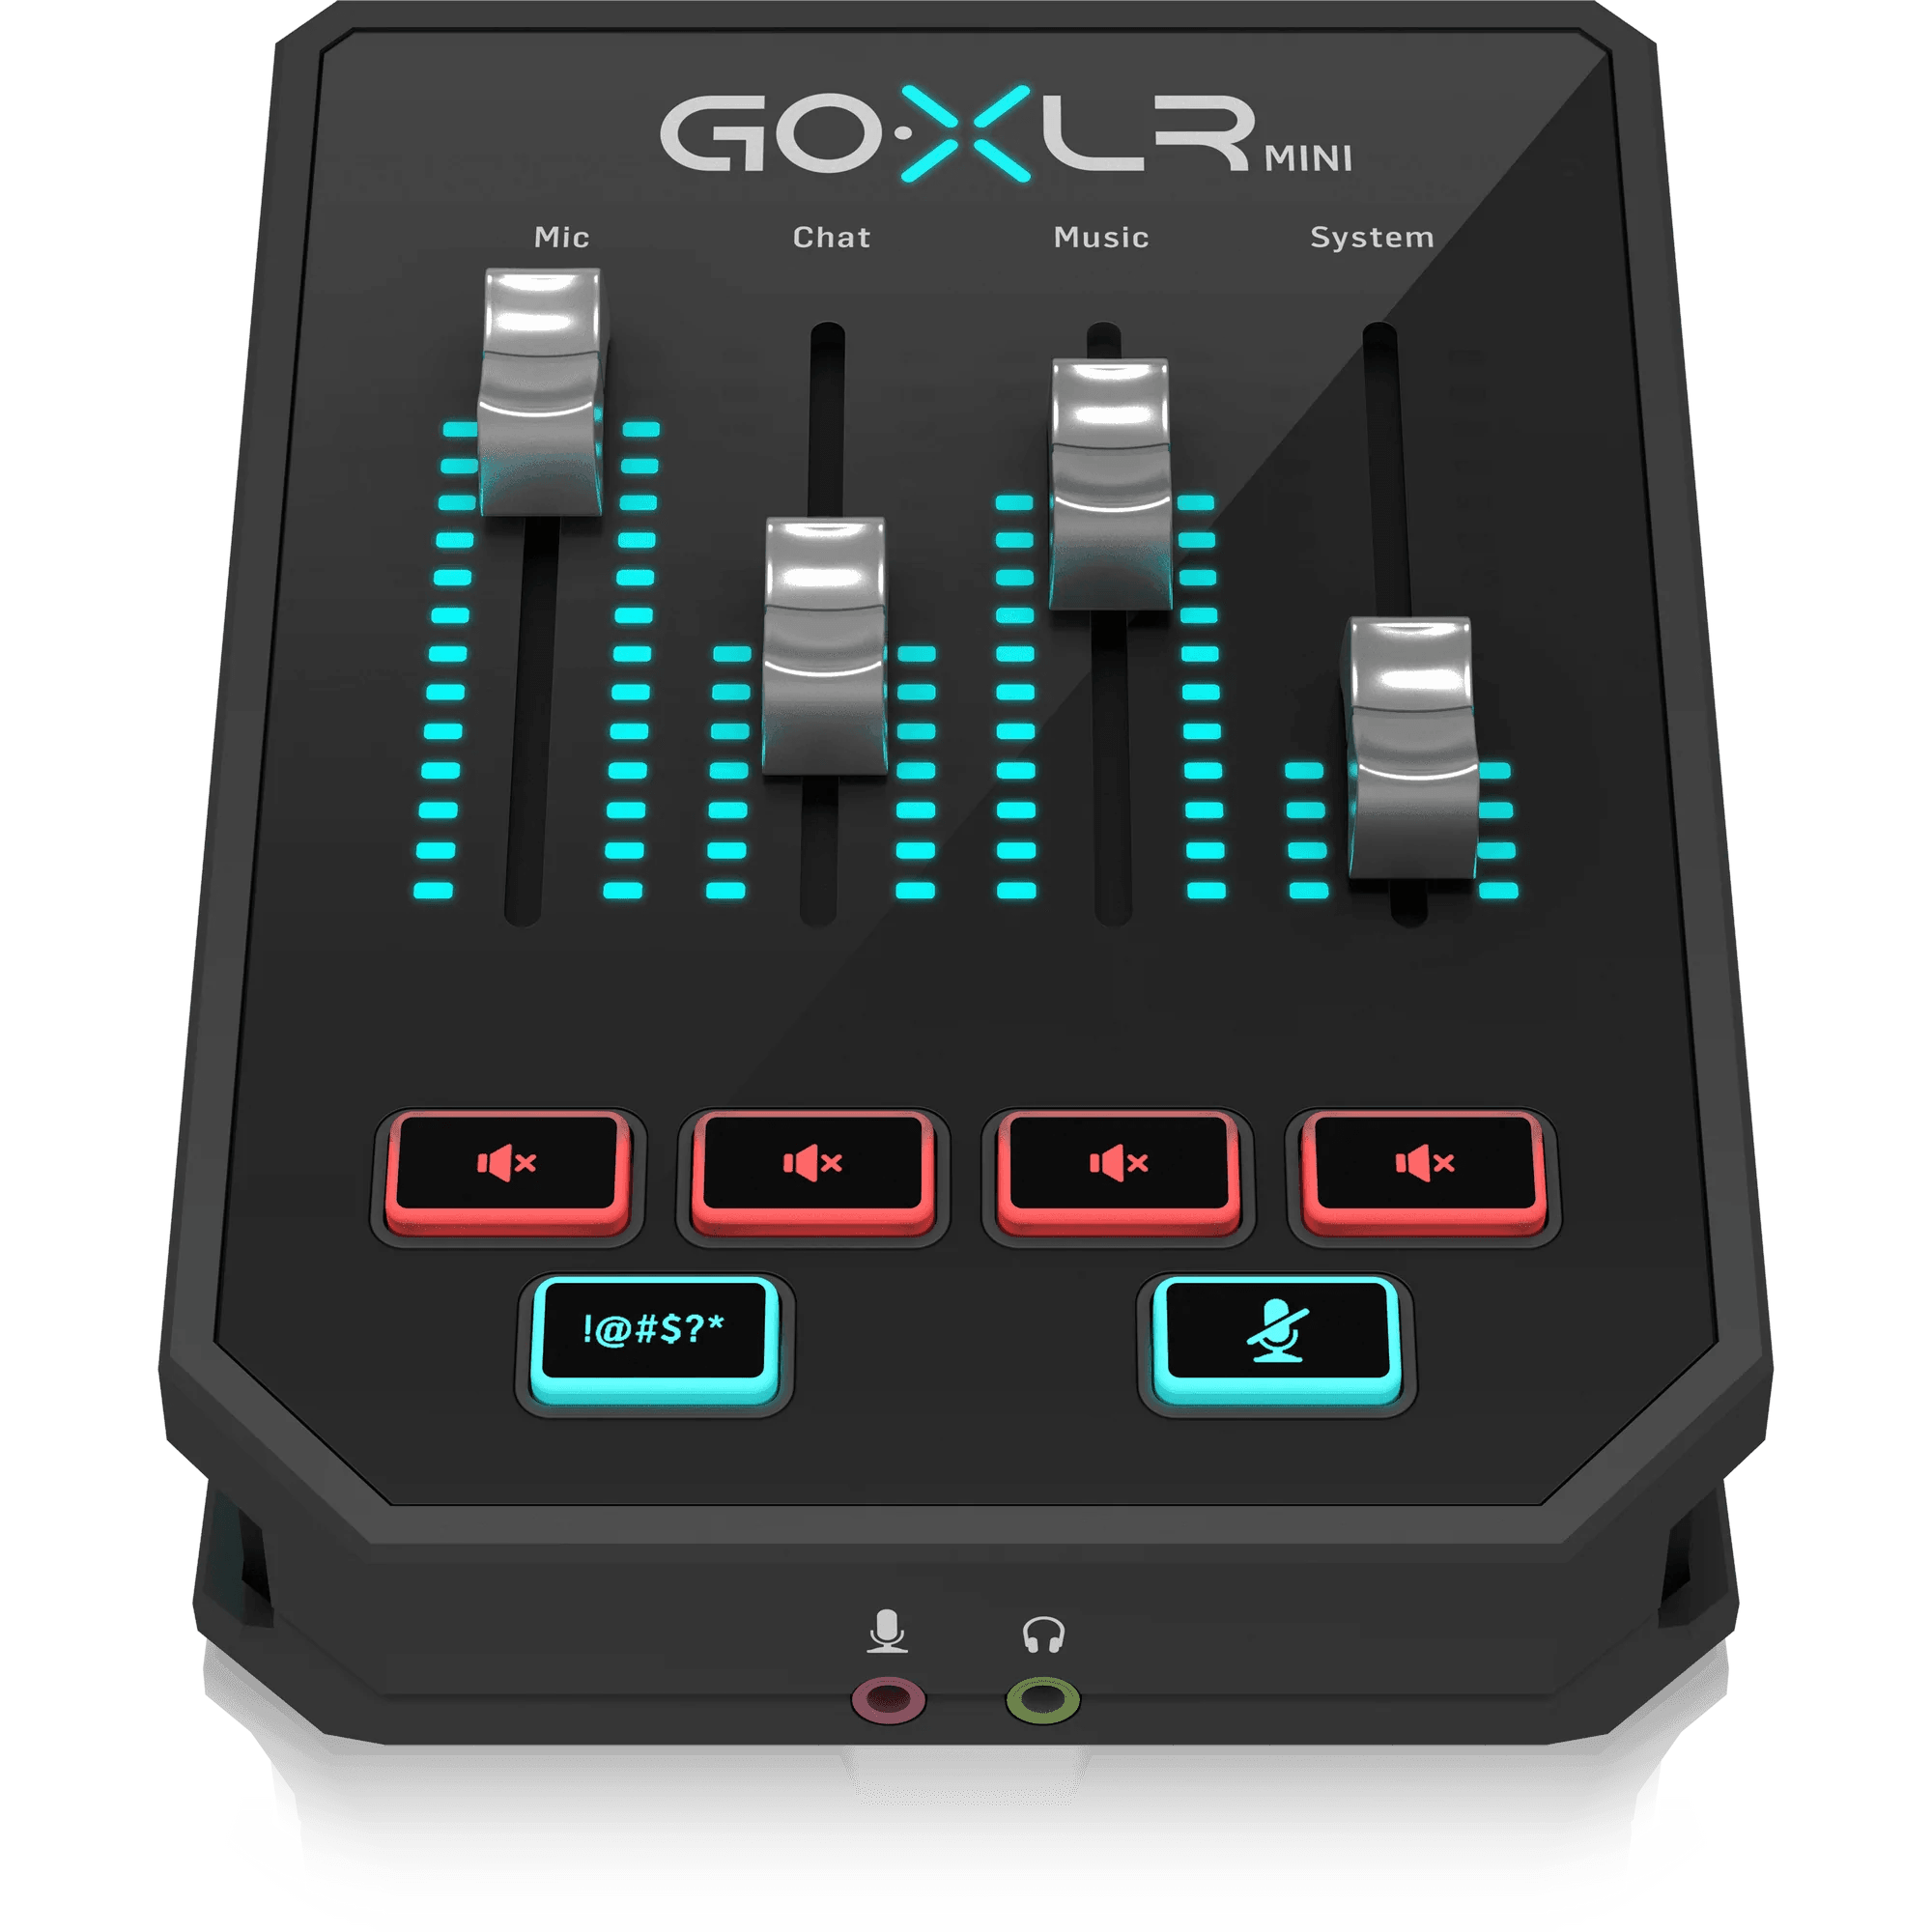 🔊 goxlr review